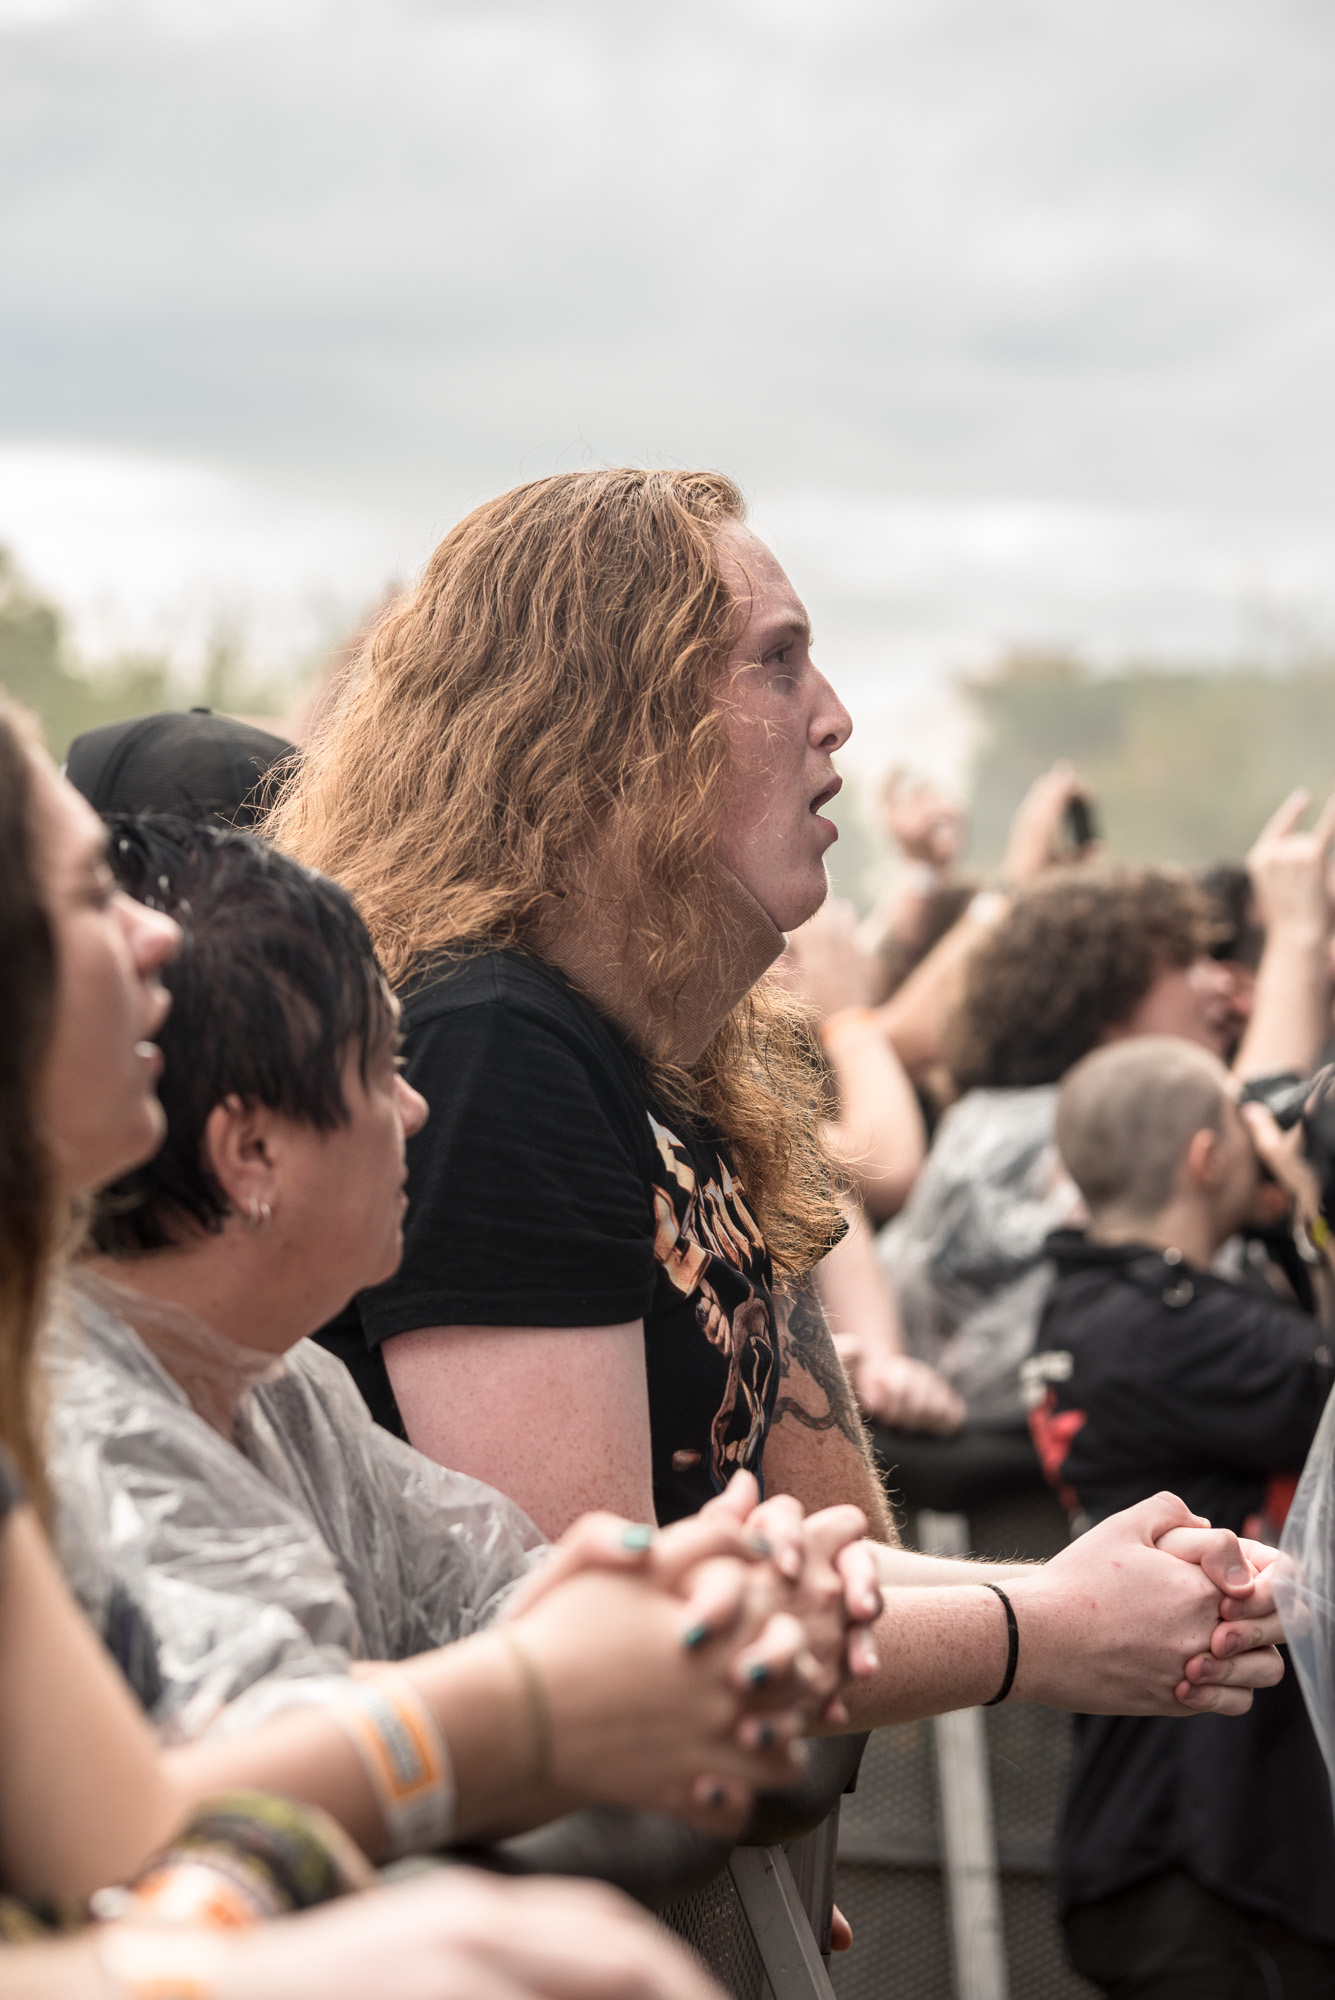 Download Festival Melbourne 2018 - Paul Tadday Photography - 0106.jpg